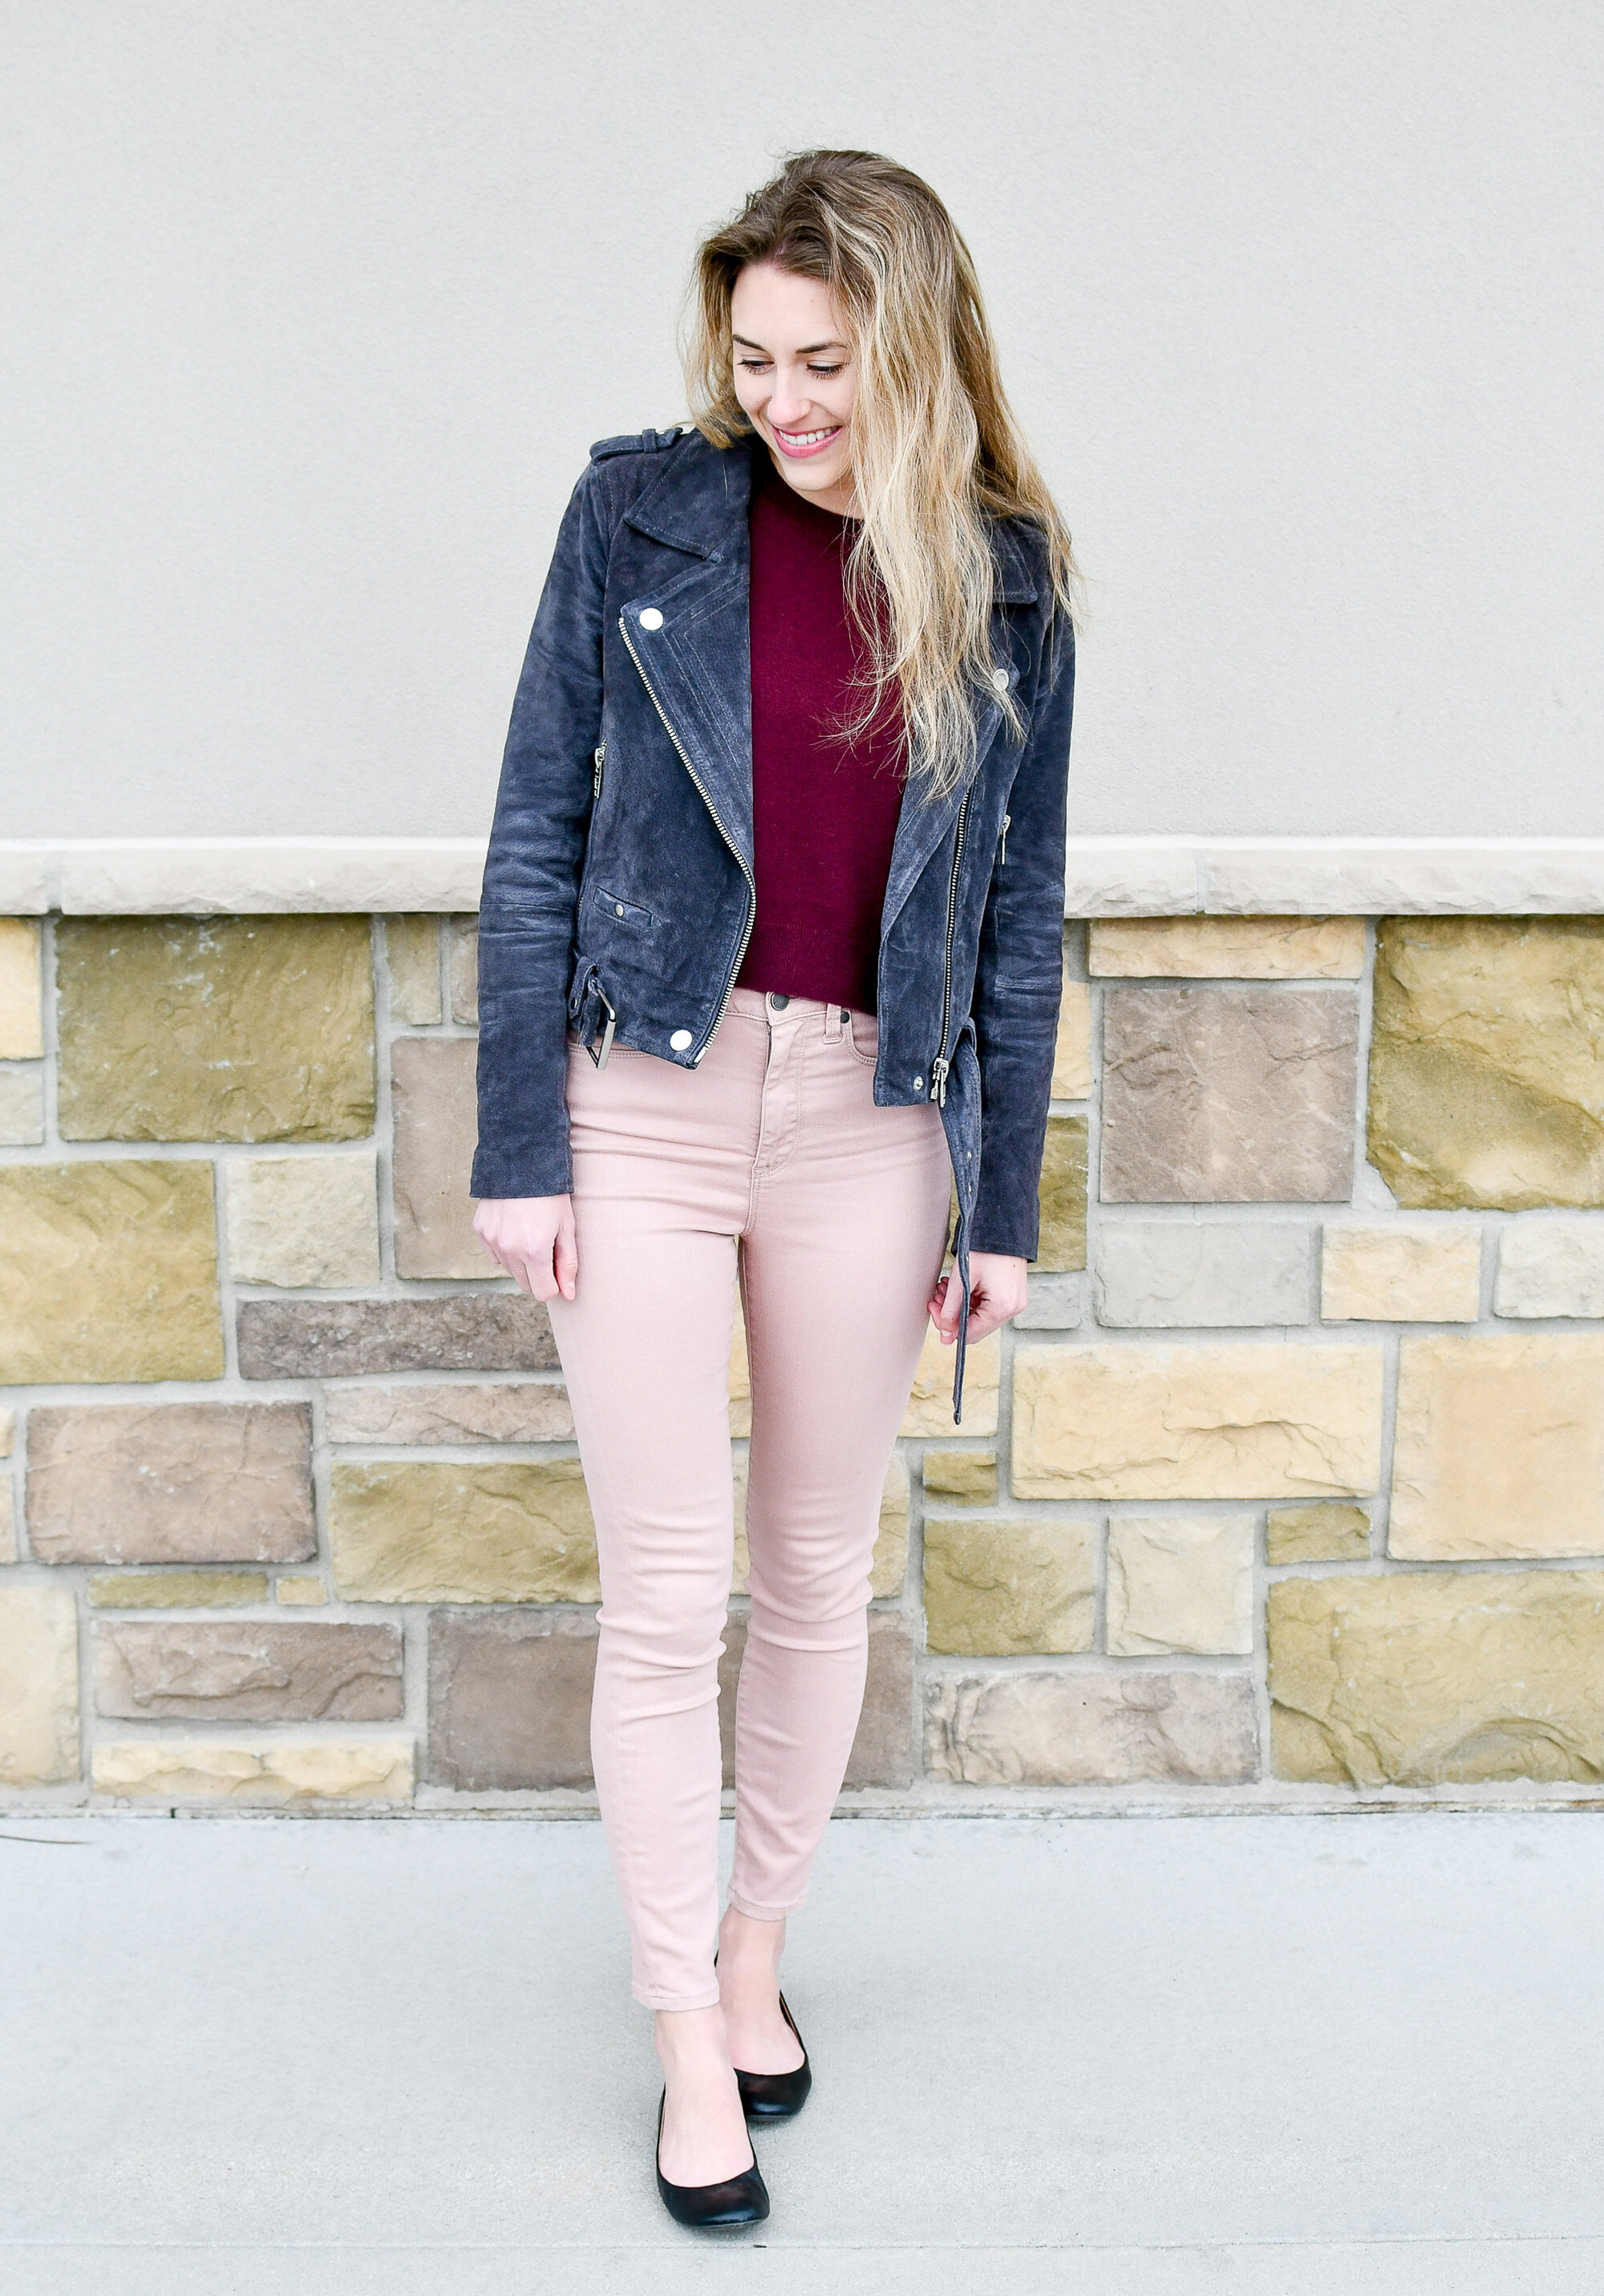 Light Pink Skinny Jean Outfit Ideas for Every Season